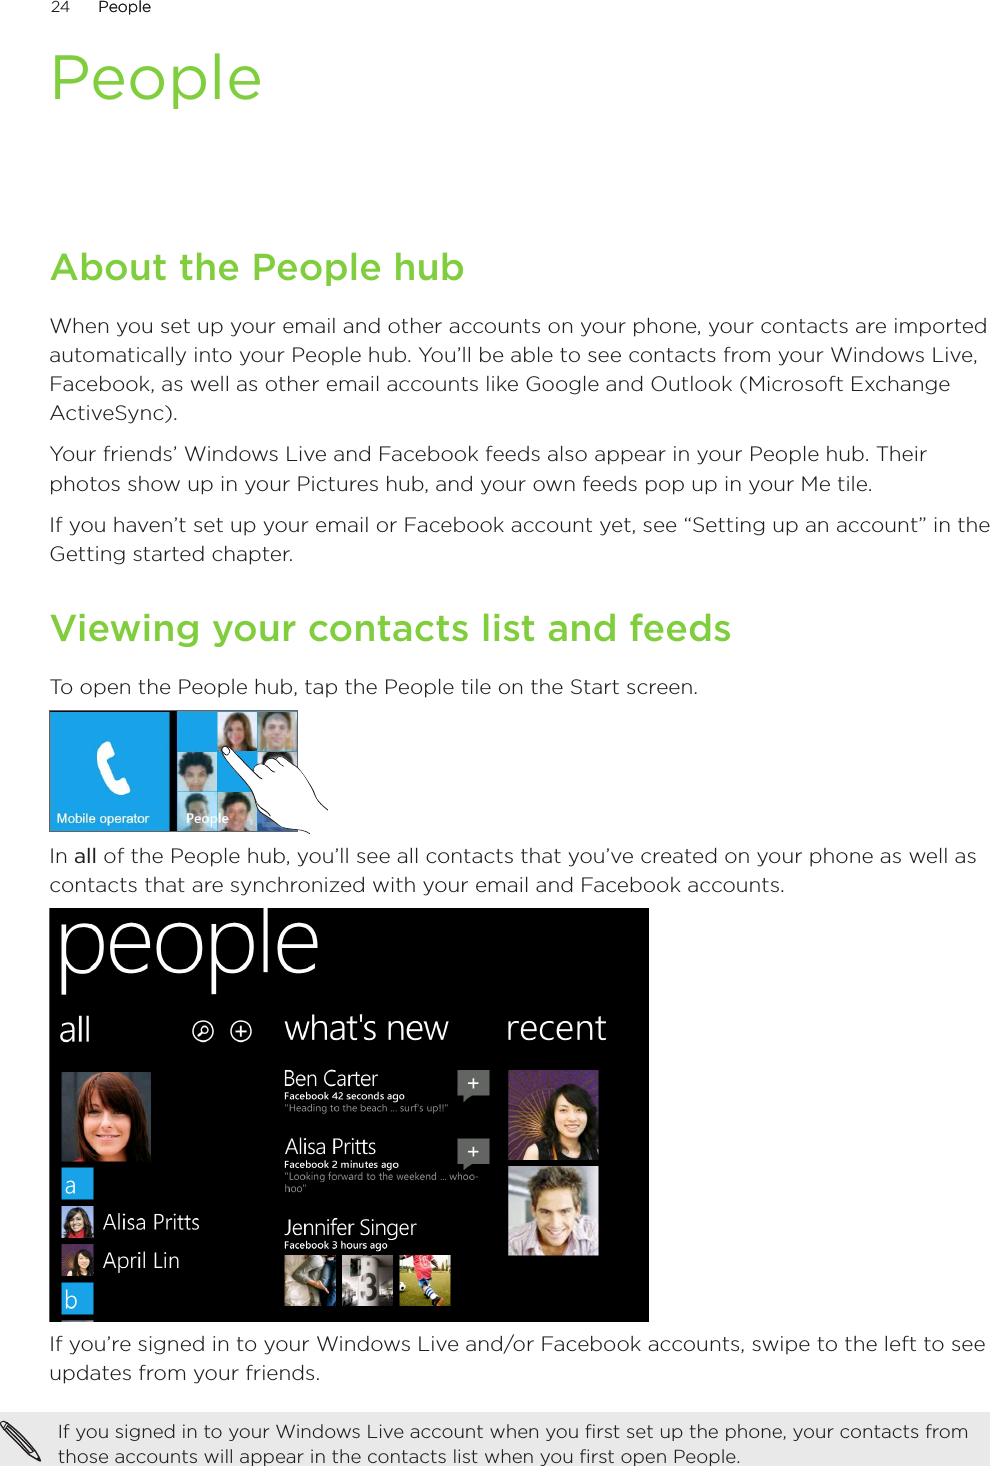 24      PeoplePeople      PeopleAbout the People hubWhen you set up your email and other accounts on your phone, your contacts are imported automatically into your People hub. You’ll be able to see contacts from your Windows Live, Facebook, as well as other email accounts like Google and Outlook (Microsoft Exchange ActiveSync).Your friends’ Windows Live and Facebook feeds also appear in your People hub. Their photos show up in your Pictures hub, and your own feeds pop up in your Me tile.If you haven’t set up your email or Facebook account yet, see “Setting up an account” in the Getting started chapter.Viewing your contacts list and feedsTo open the People hub, tap the People tile on the Start screen.In all of the People hub, you’ll see all contacts that you’ve created on your phone as well as contacts that are synchronized with your email and Facebook accounts.If you’re signed in to your Windows Live and/or Facebook accounts, swipe to the left to see updates from your friends.If you signed in to your Windows Live account when you first set up the phone, your contacts from those accounts will appear in the contacts list when you first open People.